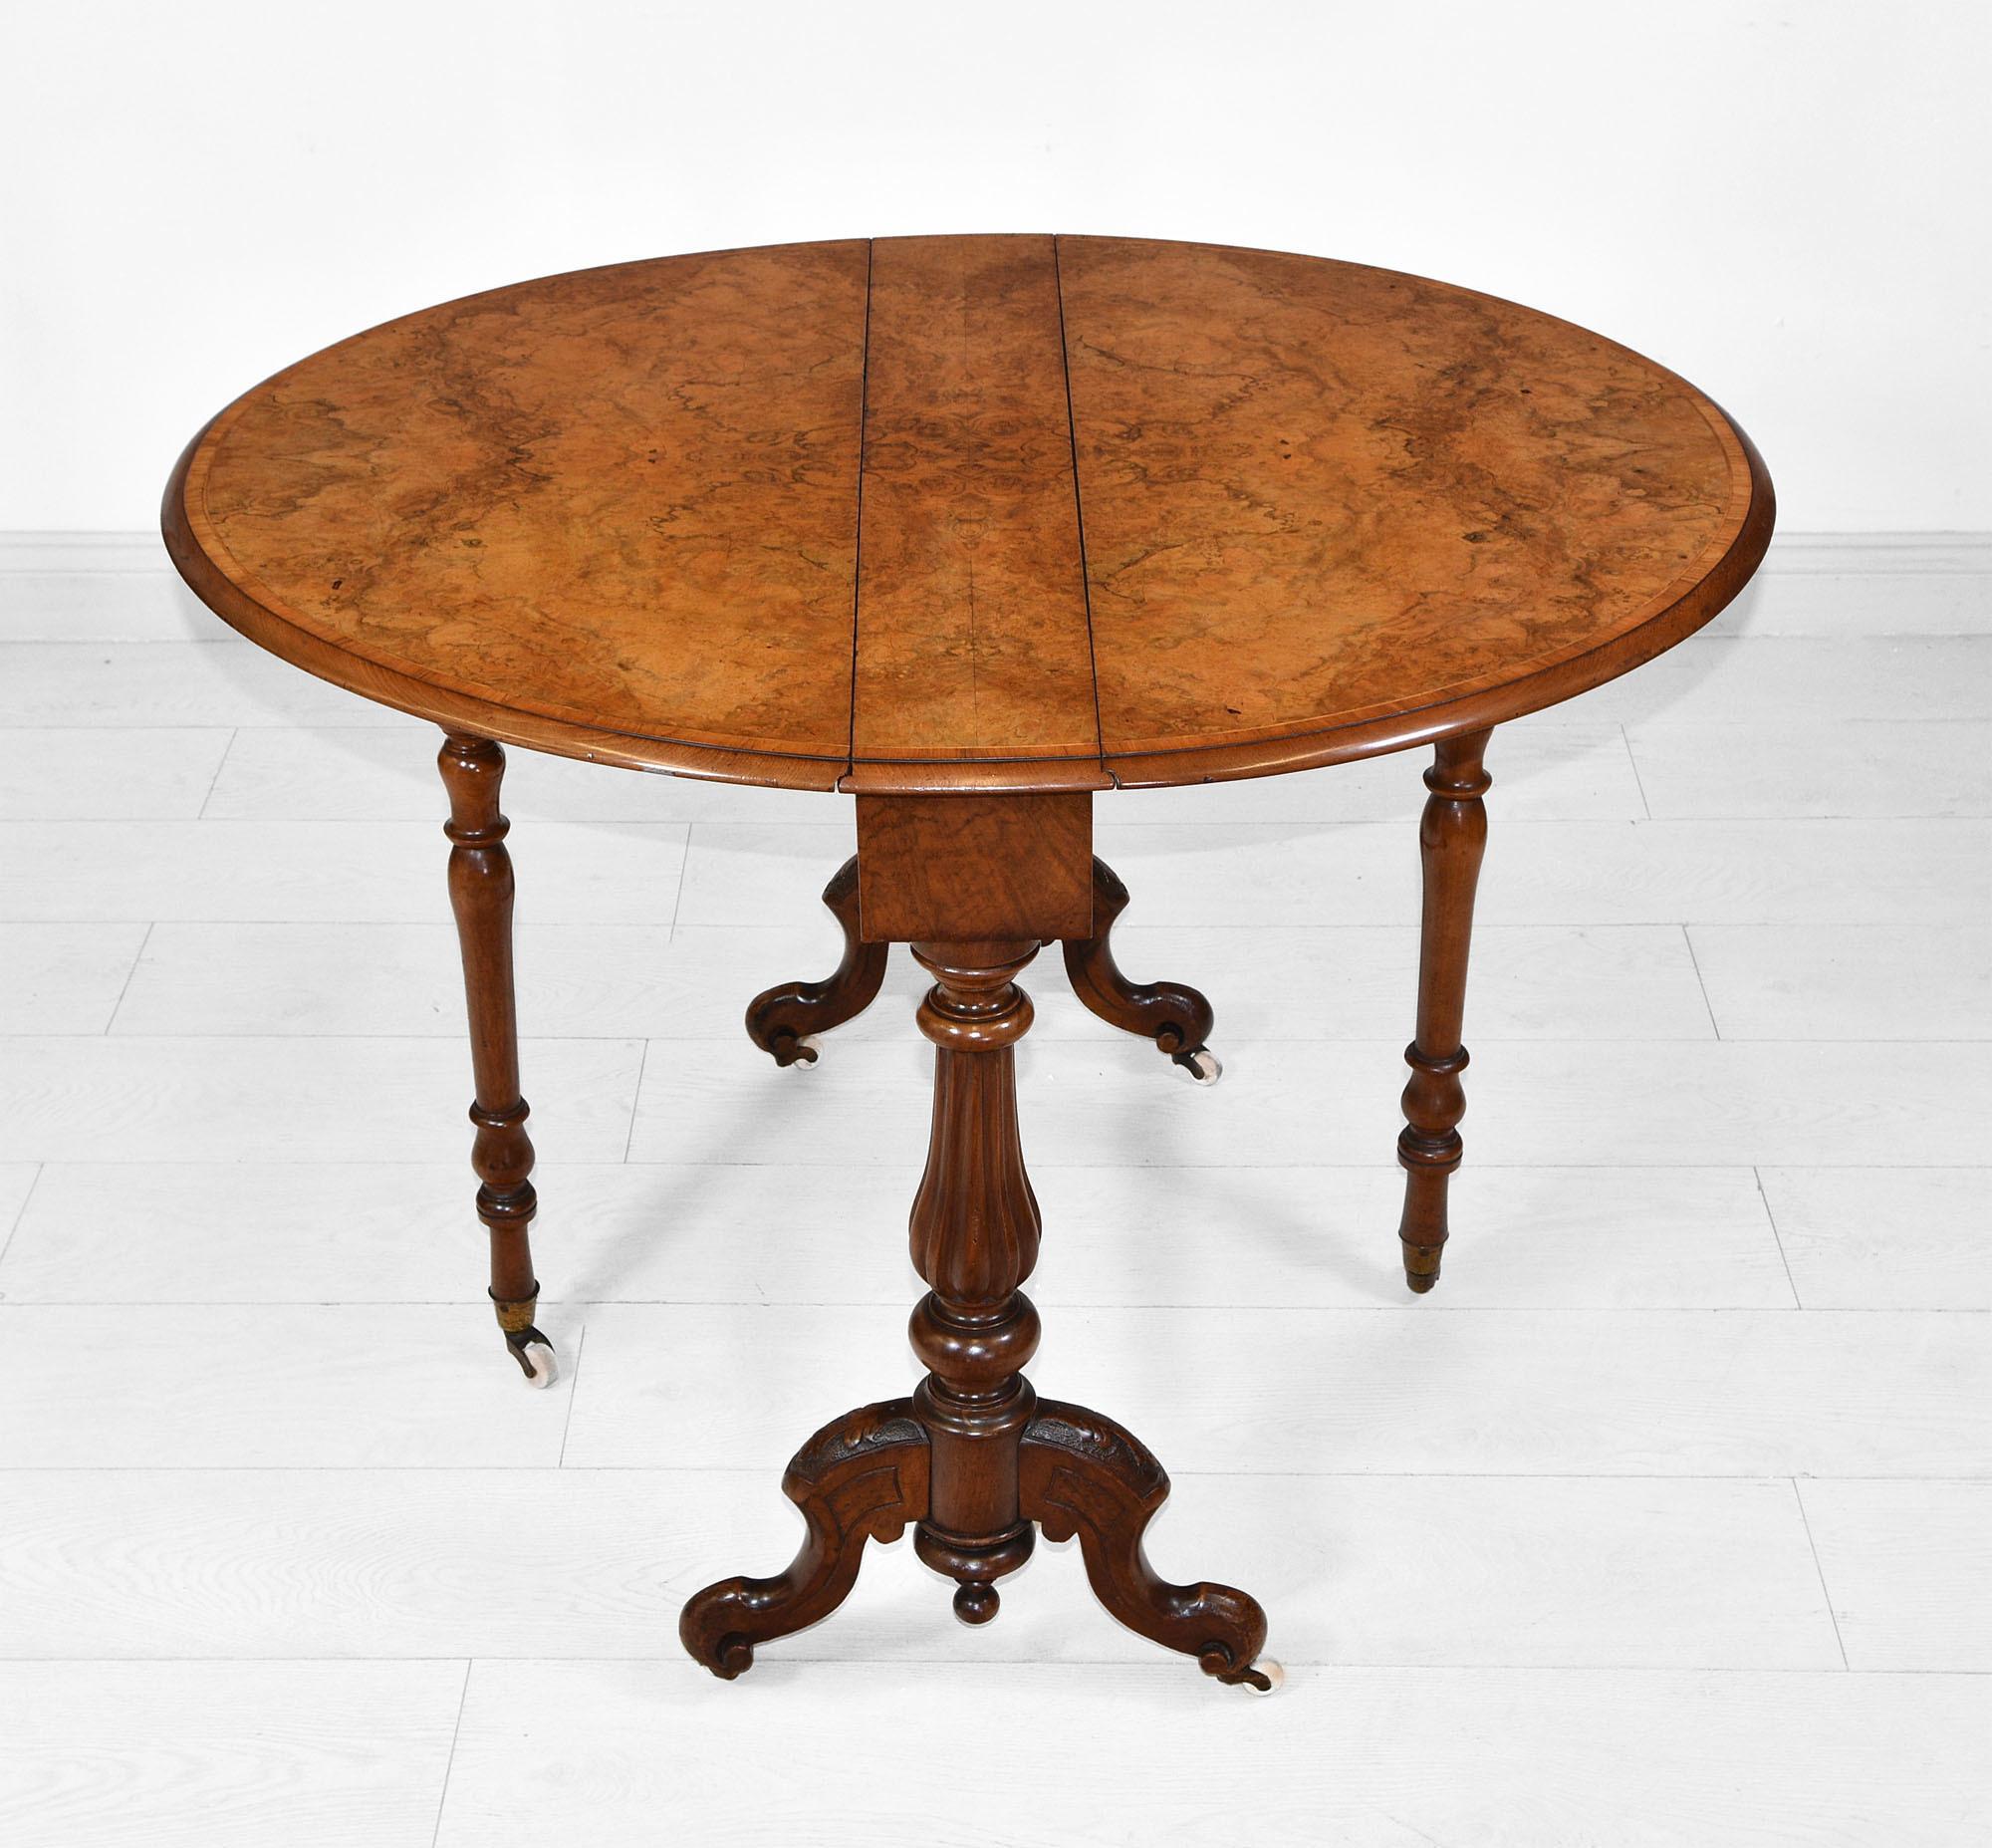 An elegant antique burr walnut dropleaf Sutherland table. English Circa 1870.


The top shows a wonderful mellowed colour, veneered in highly decorative burr walnut. 

The table has the original patina which has been cleaned and waxed. There